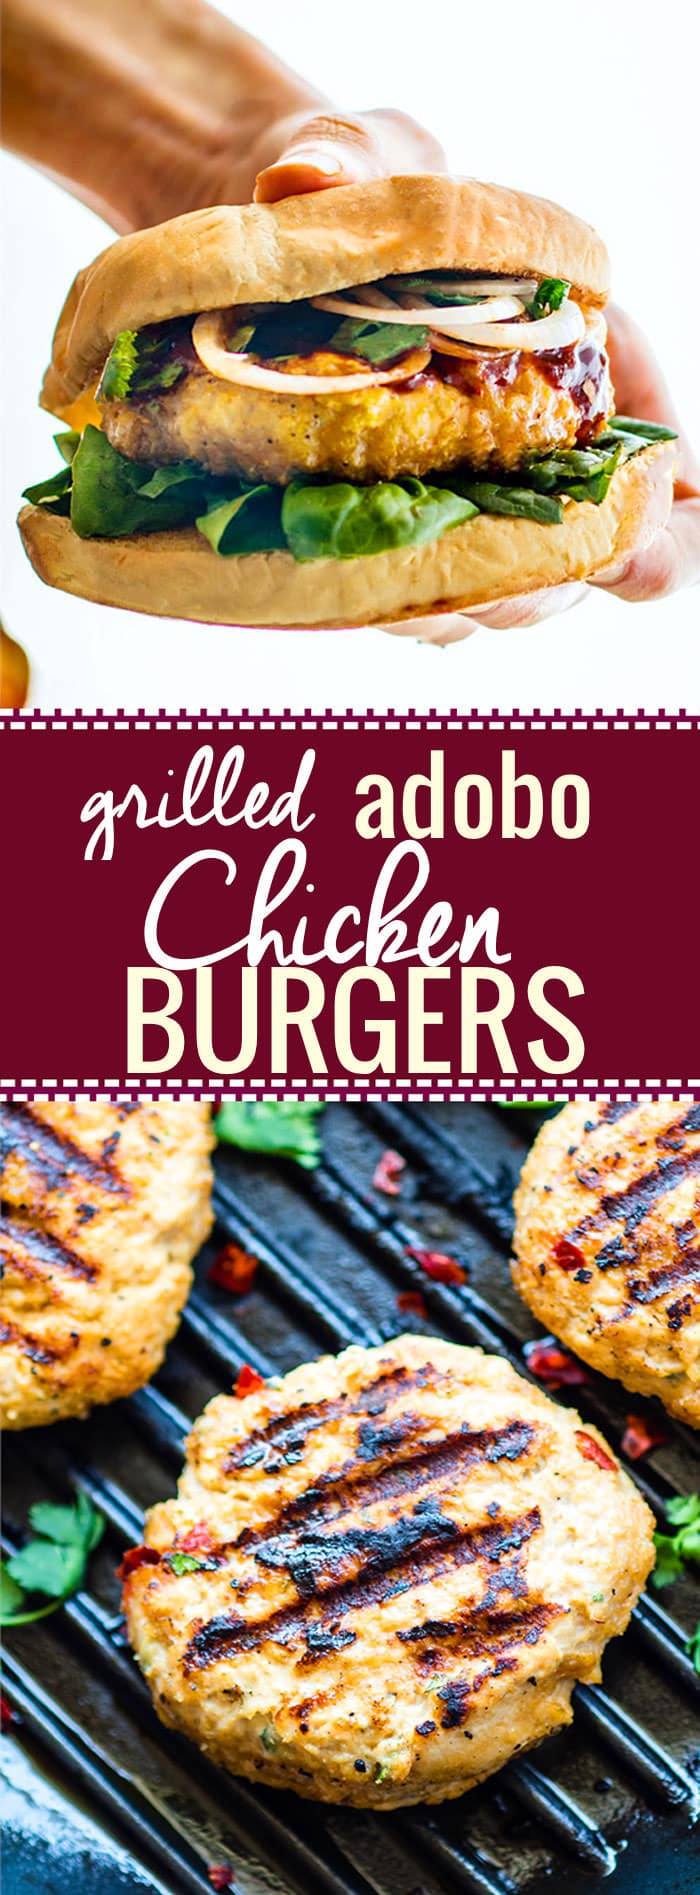 Grilled Adobo Chicken Burgers. Mexican and Filipino style adobo chicken flavors combined then grilled to perfection. Healthy, Gluten free Chicken Burgers! @cottercrunch